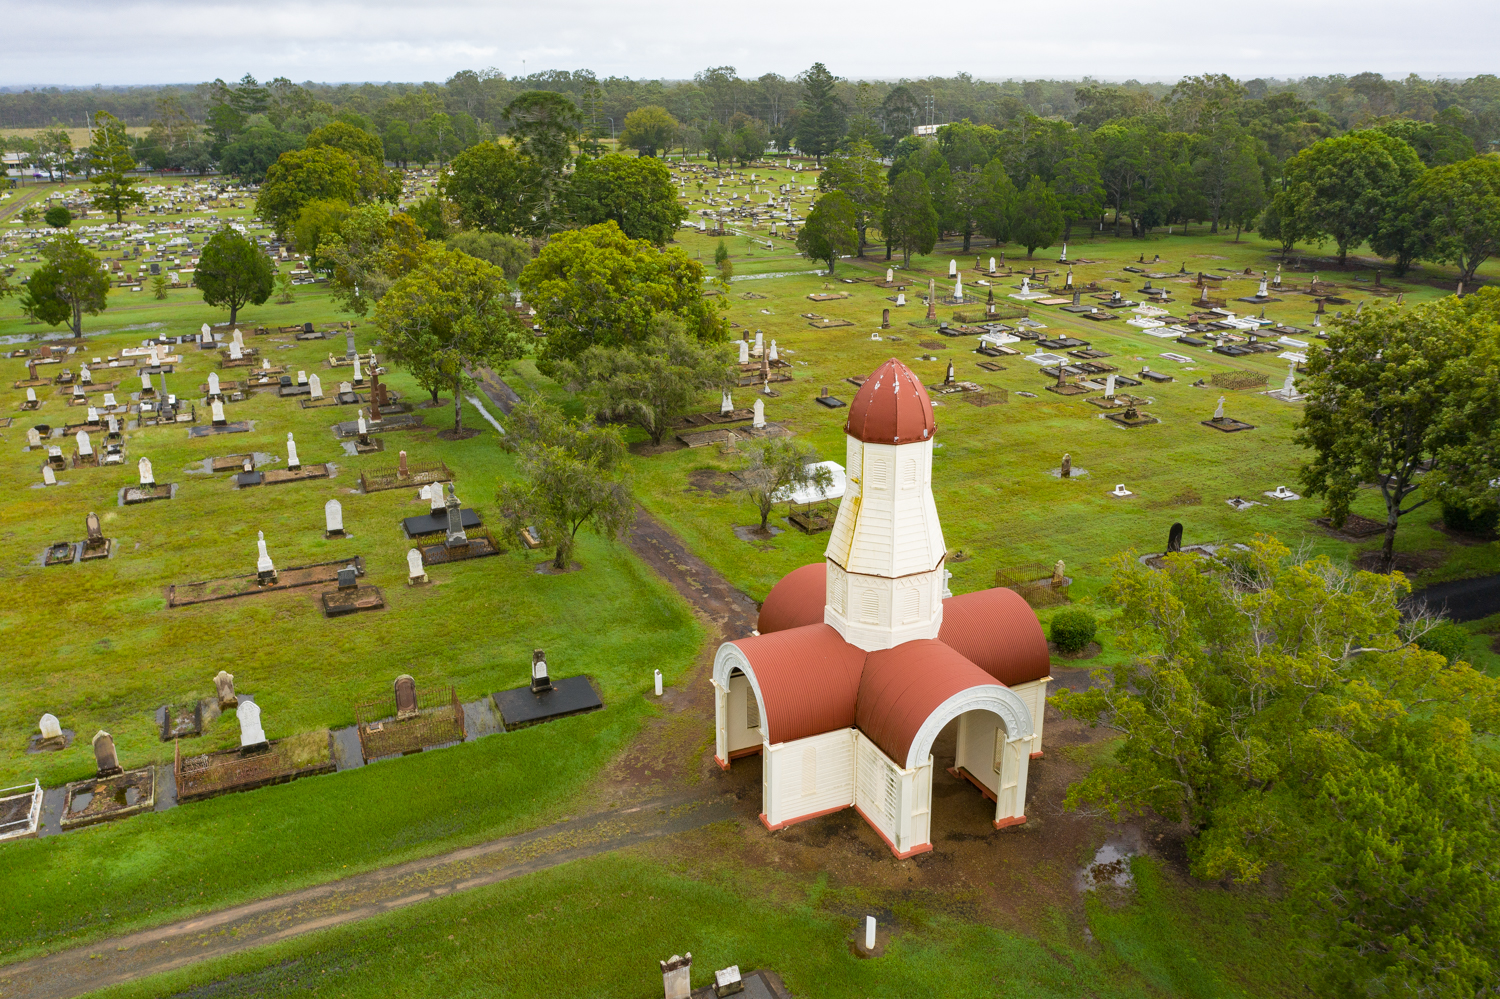 Help commemorate 150-year anniversary of local cemetery